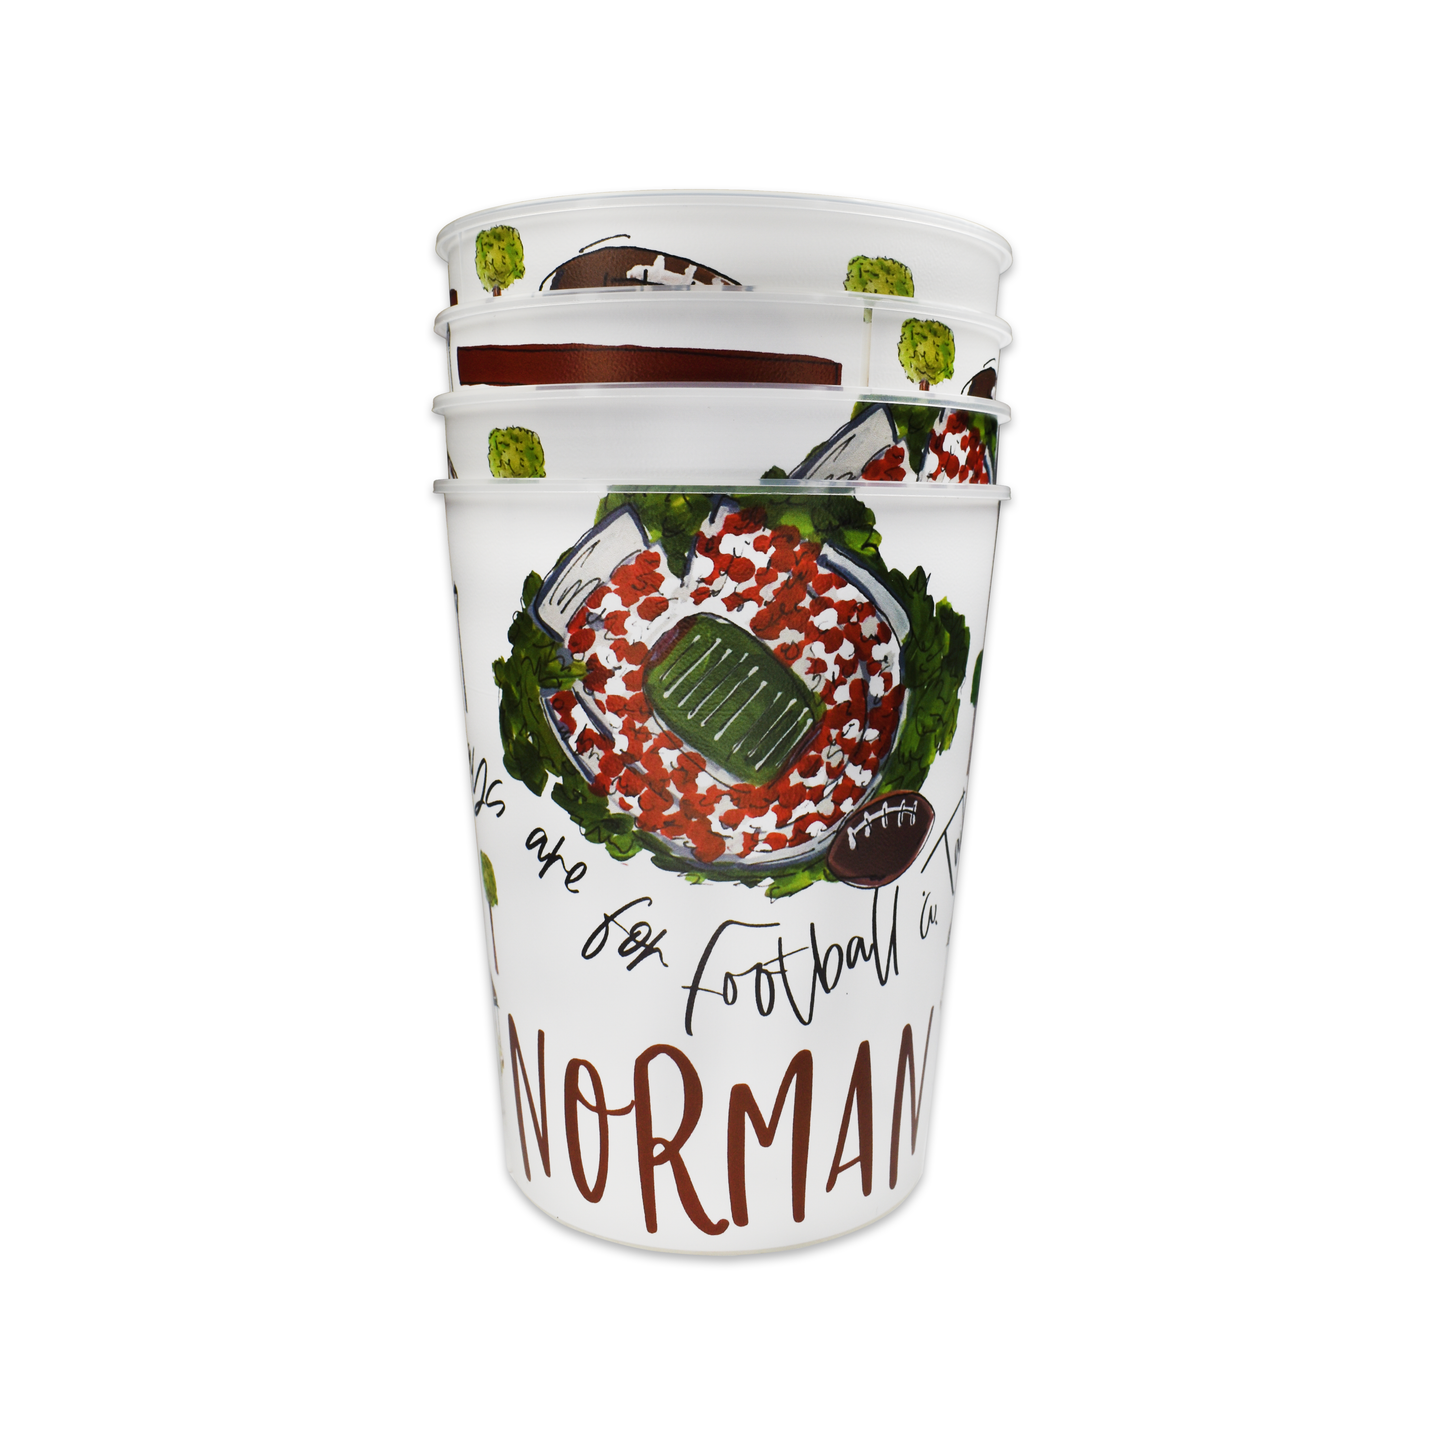 Norman Reusable Party Cups, Set of 4